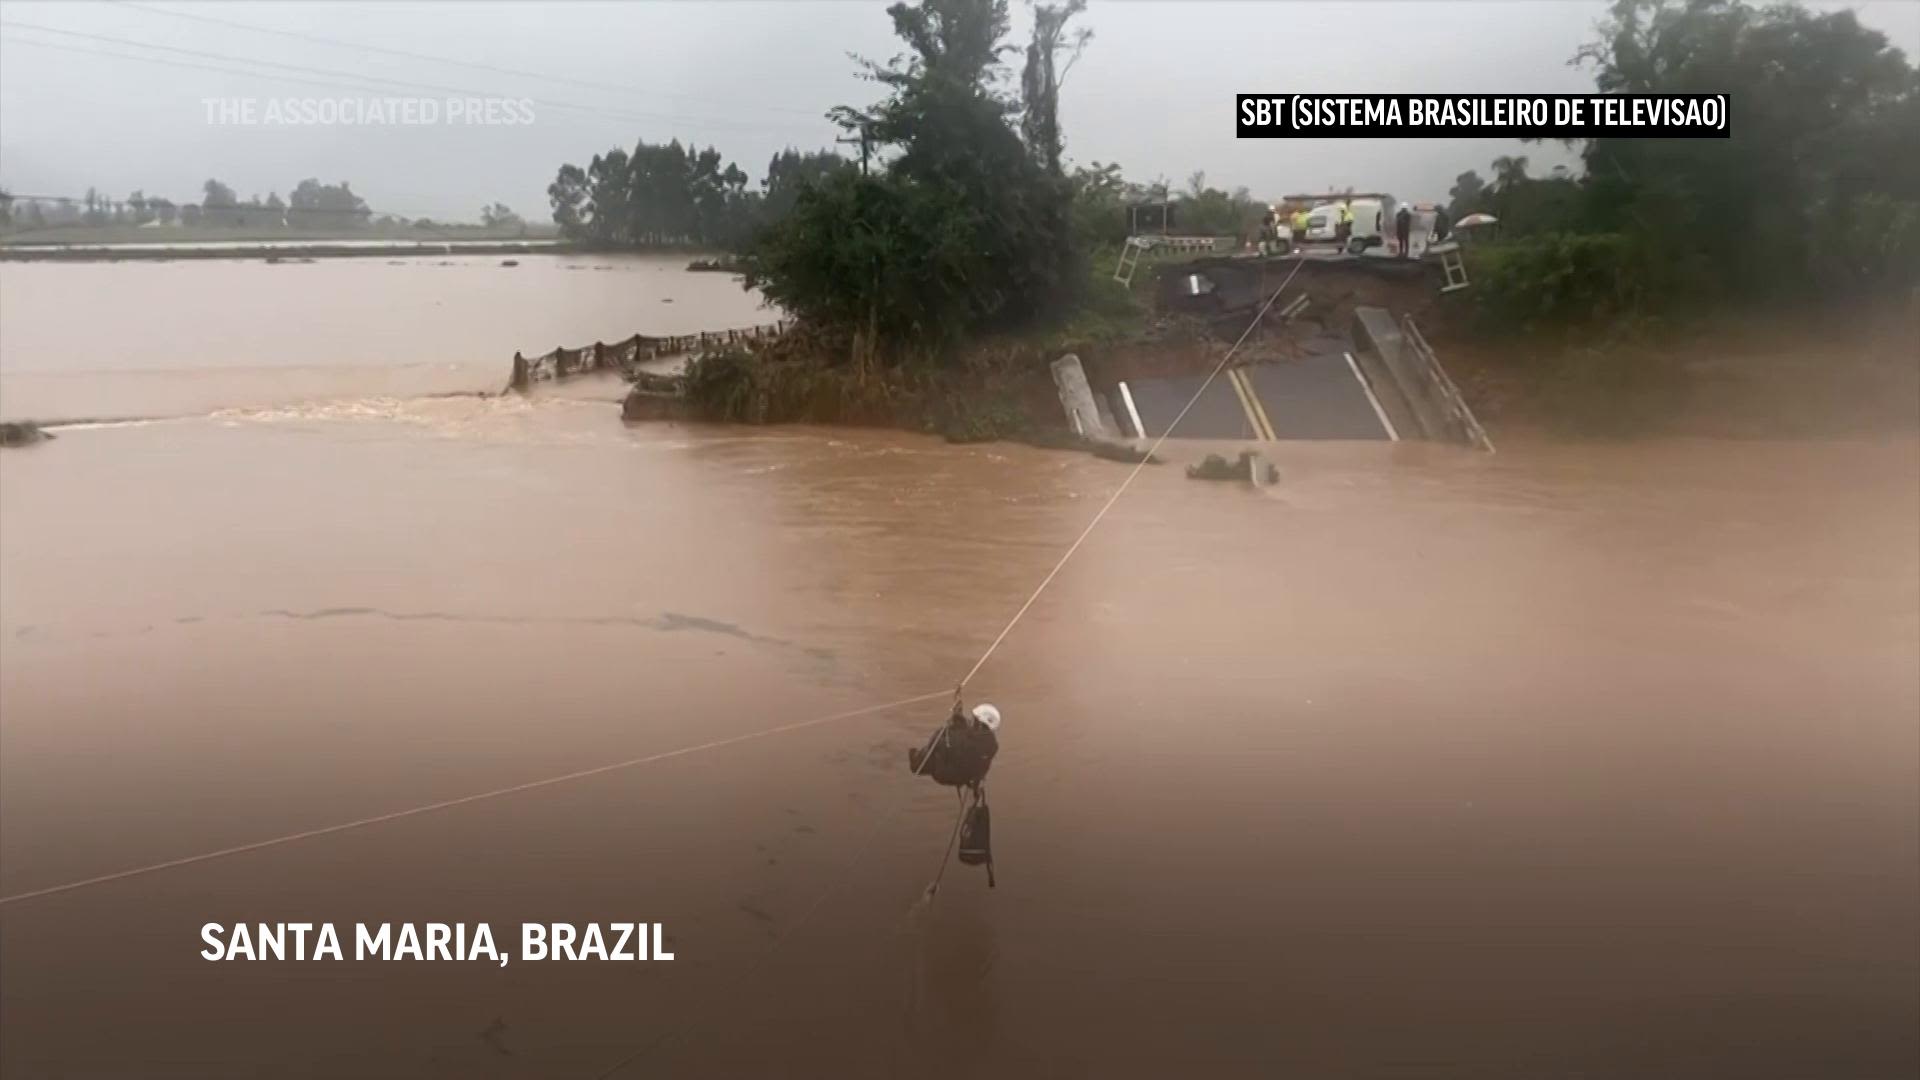 Death toll from heavy rains in southern Brazil jumps to 29, with 60 more still mising